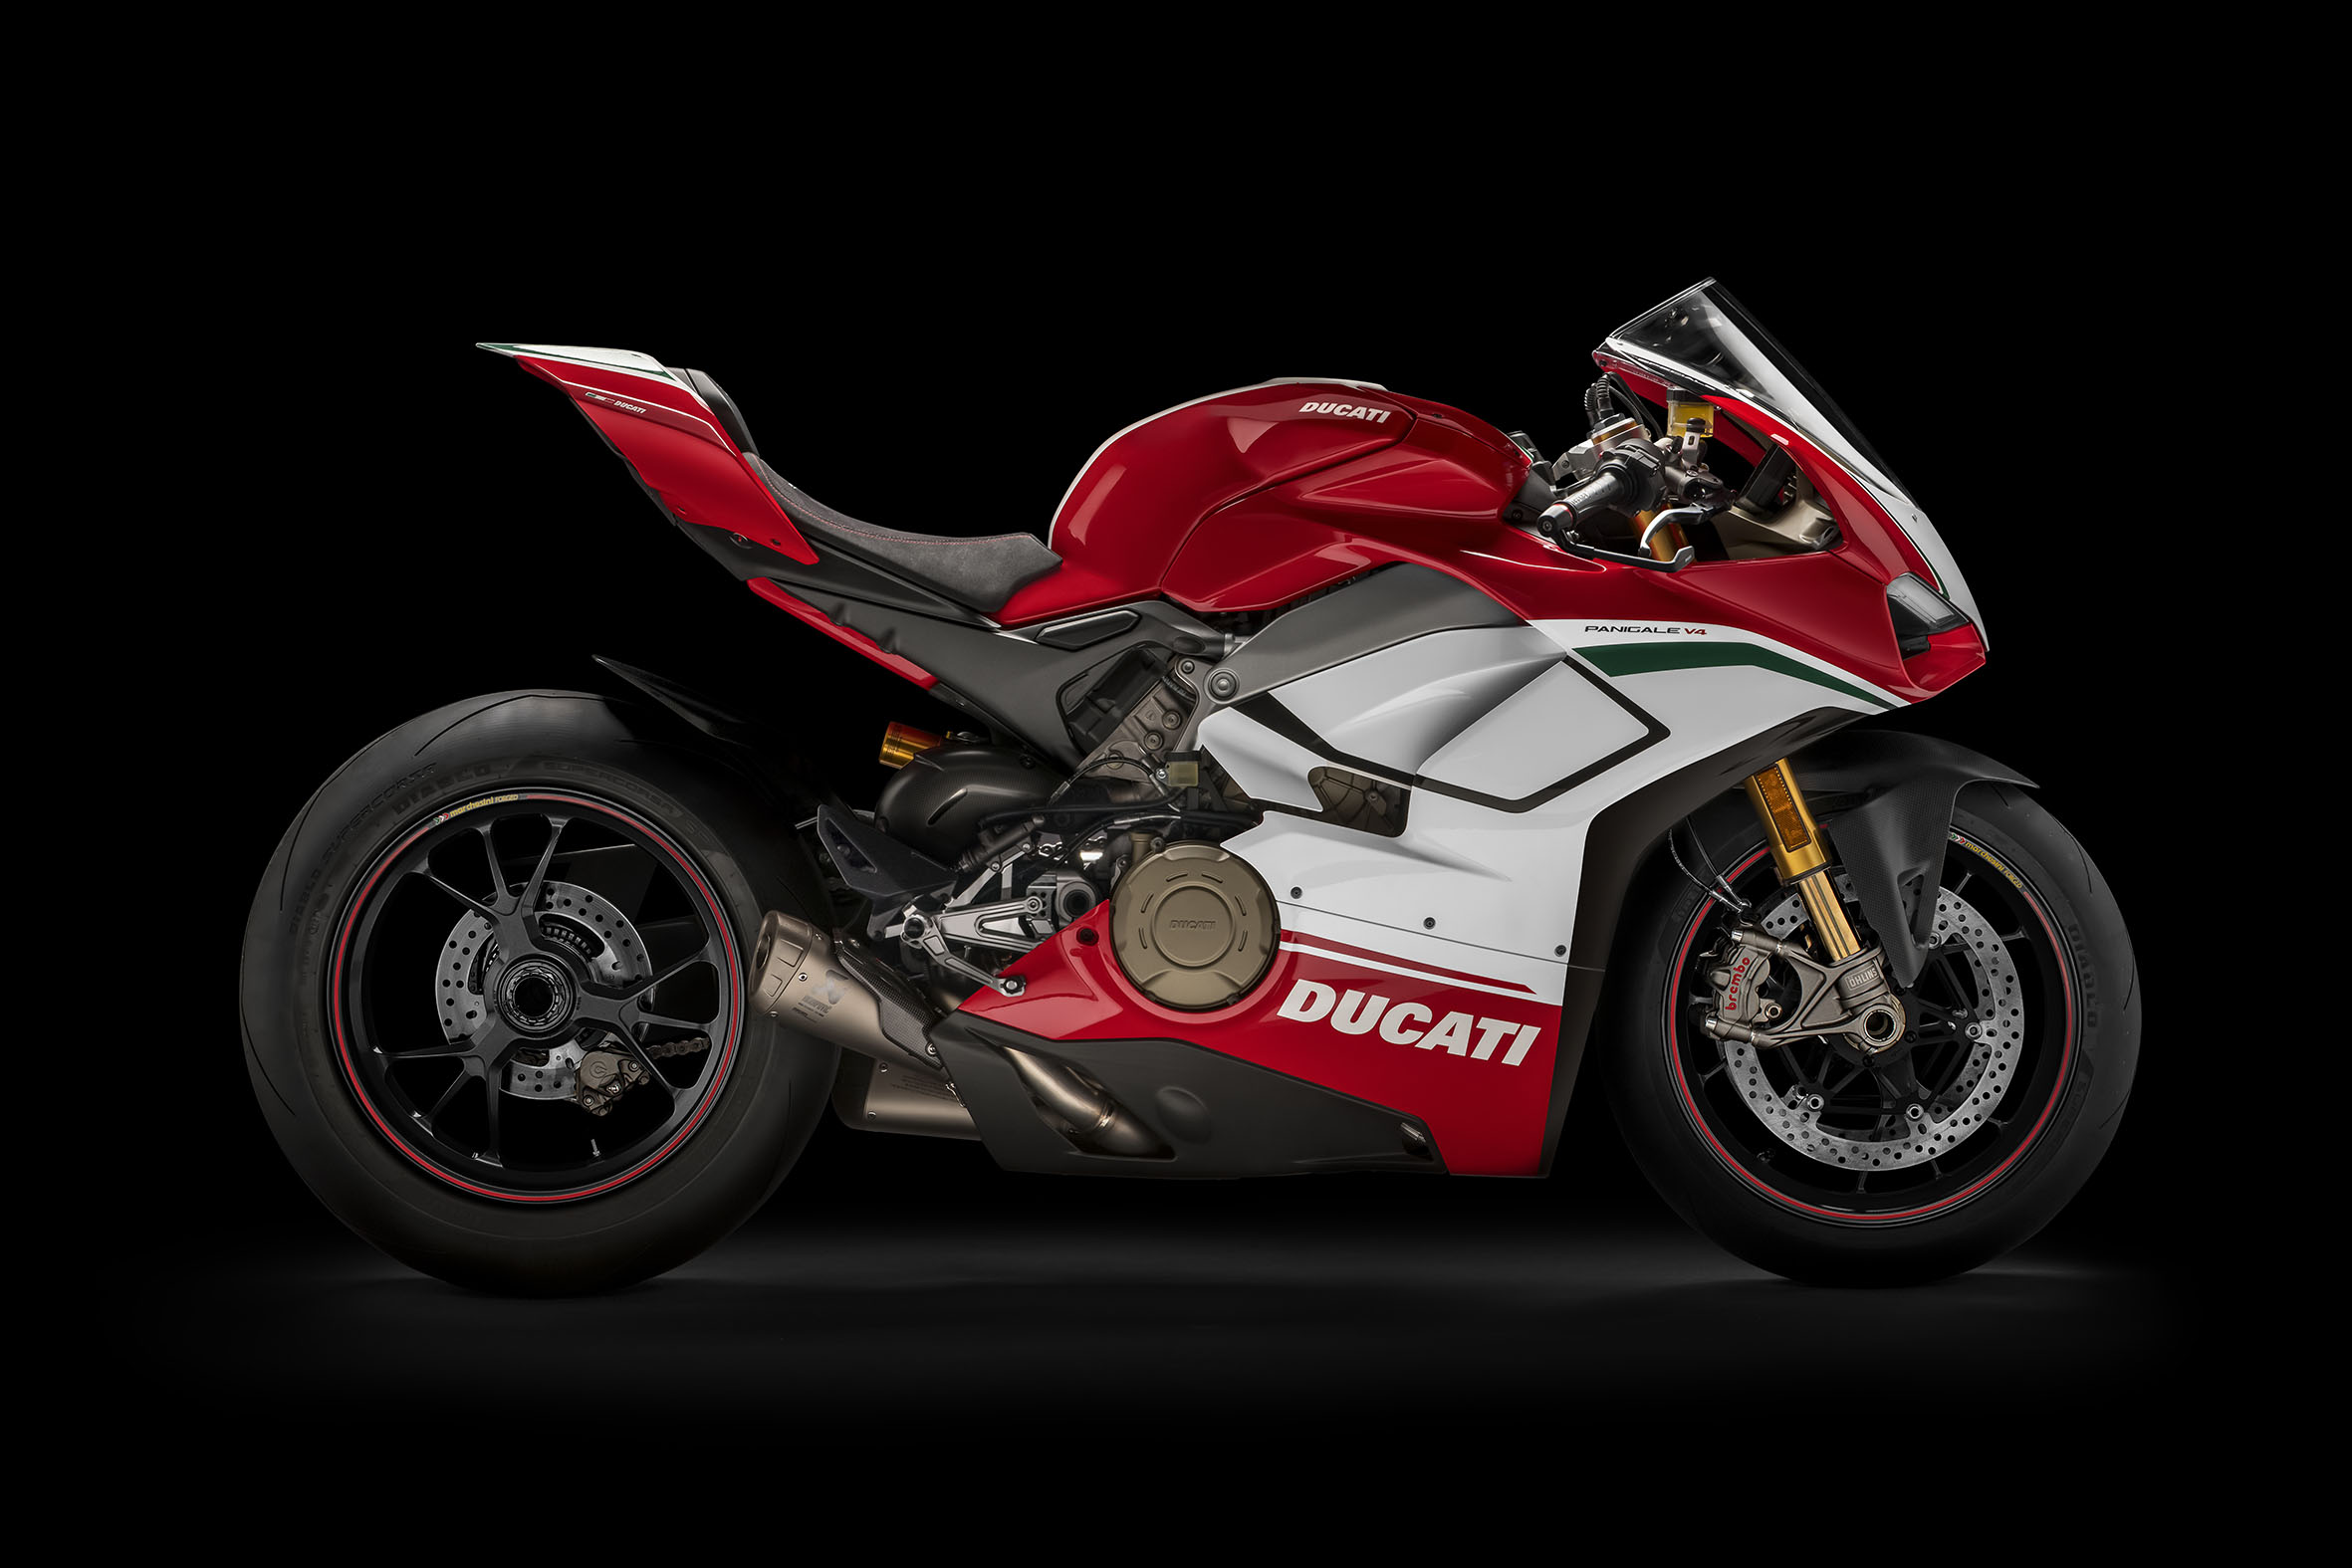 Panigale V4 Speciale